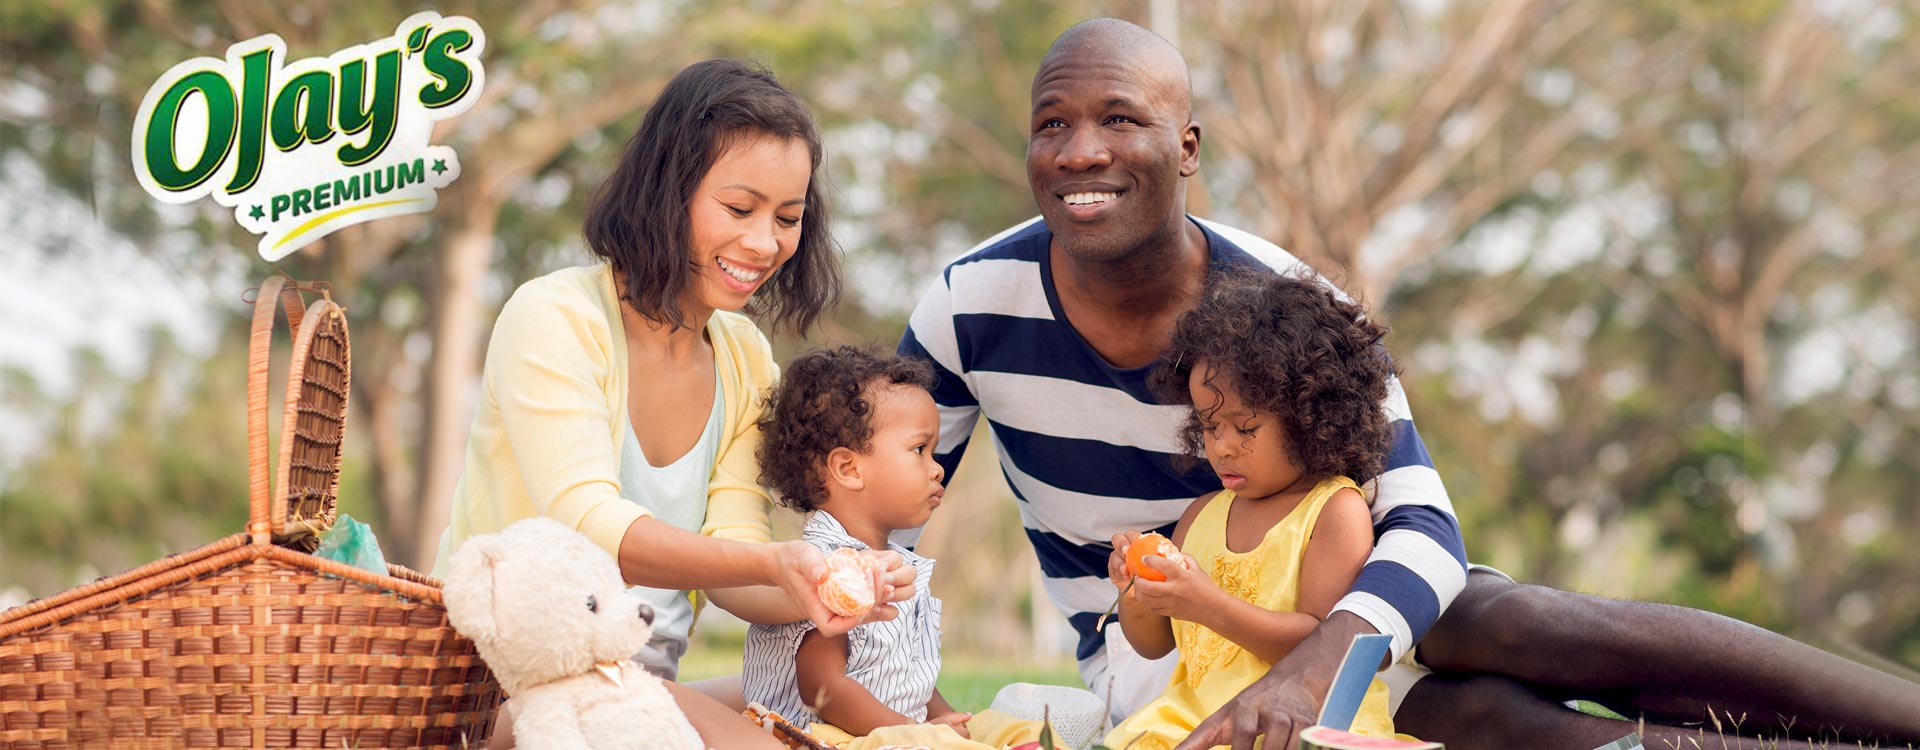 Couple with their kids enjoying picnic